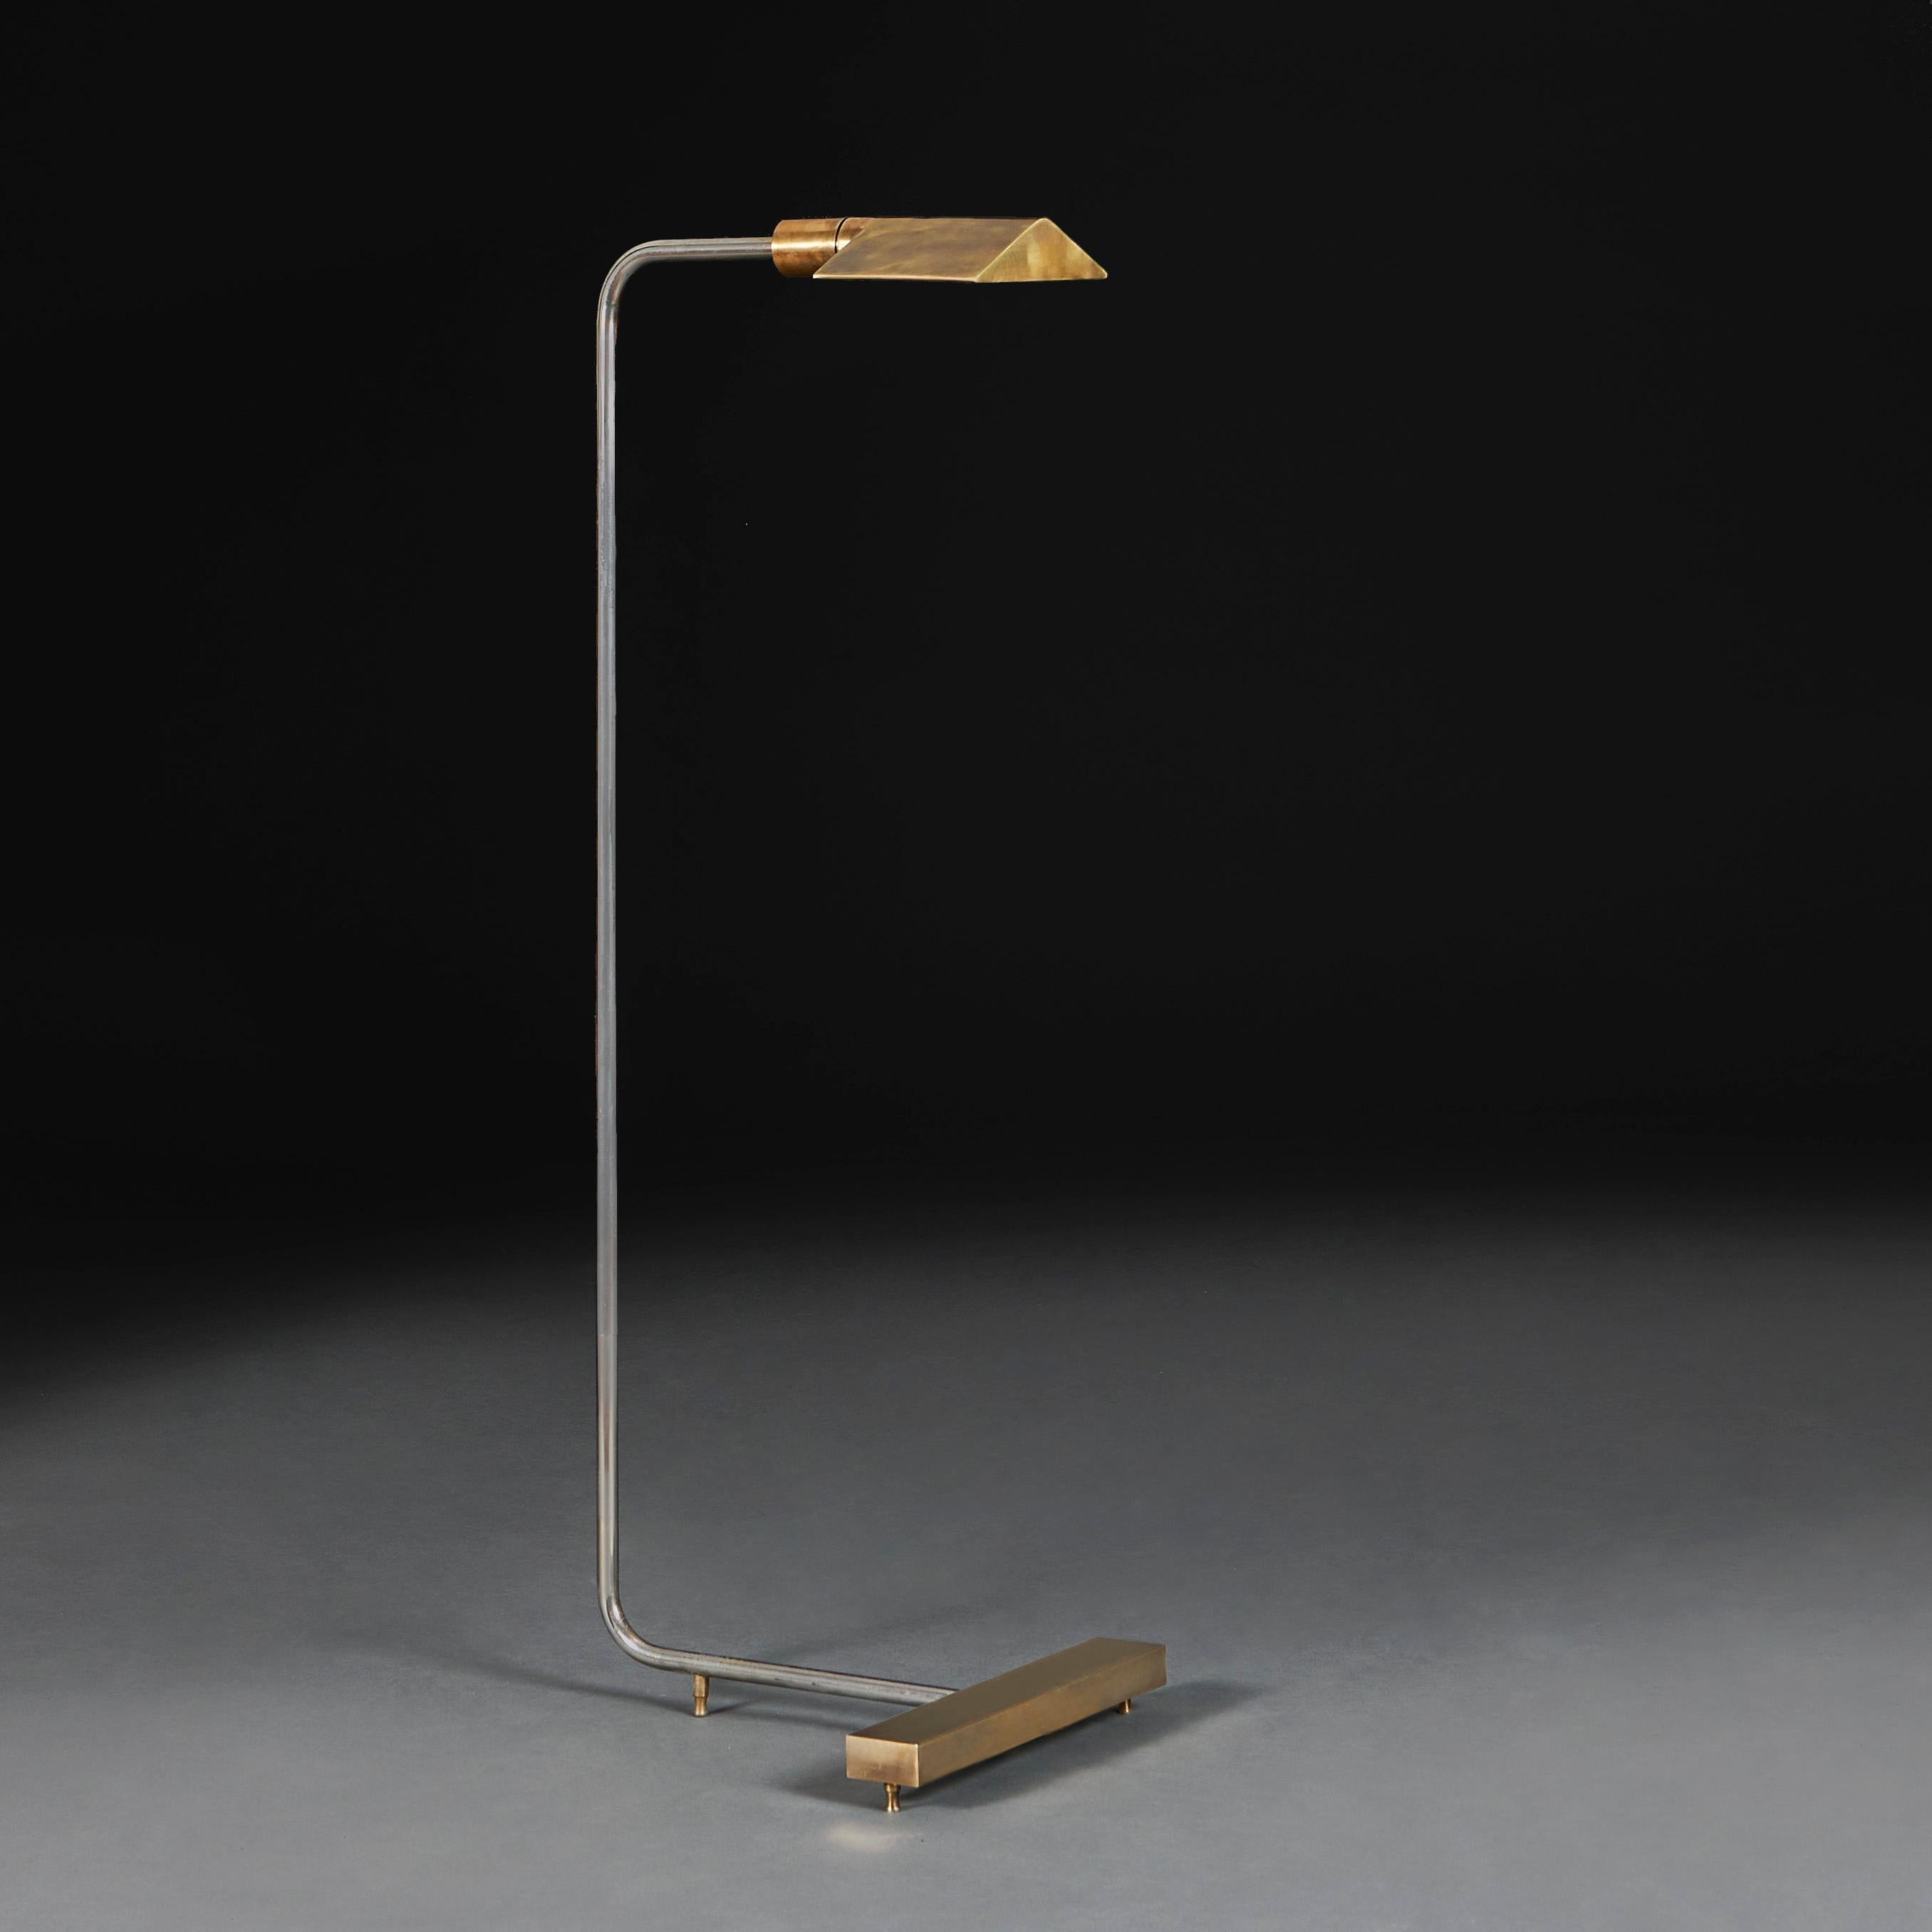 USA, circa 1967

A mid twentieth century chrome and brass reading lamp, by Cedric Hartman. With swing arm and adjustable brass shade.

Cedric Hartman, known for superior quality design and workmanship Introduced this iconic Cedric Hartman Low